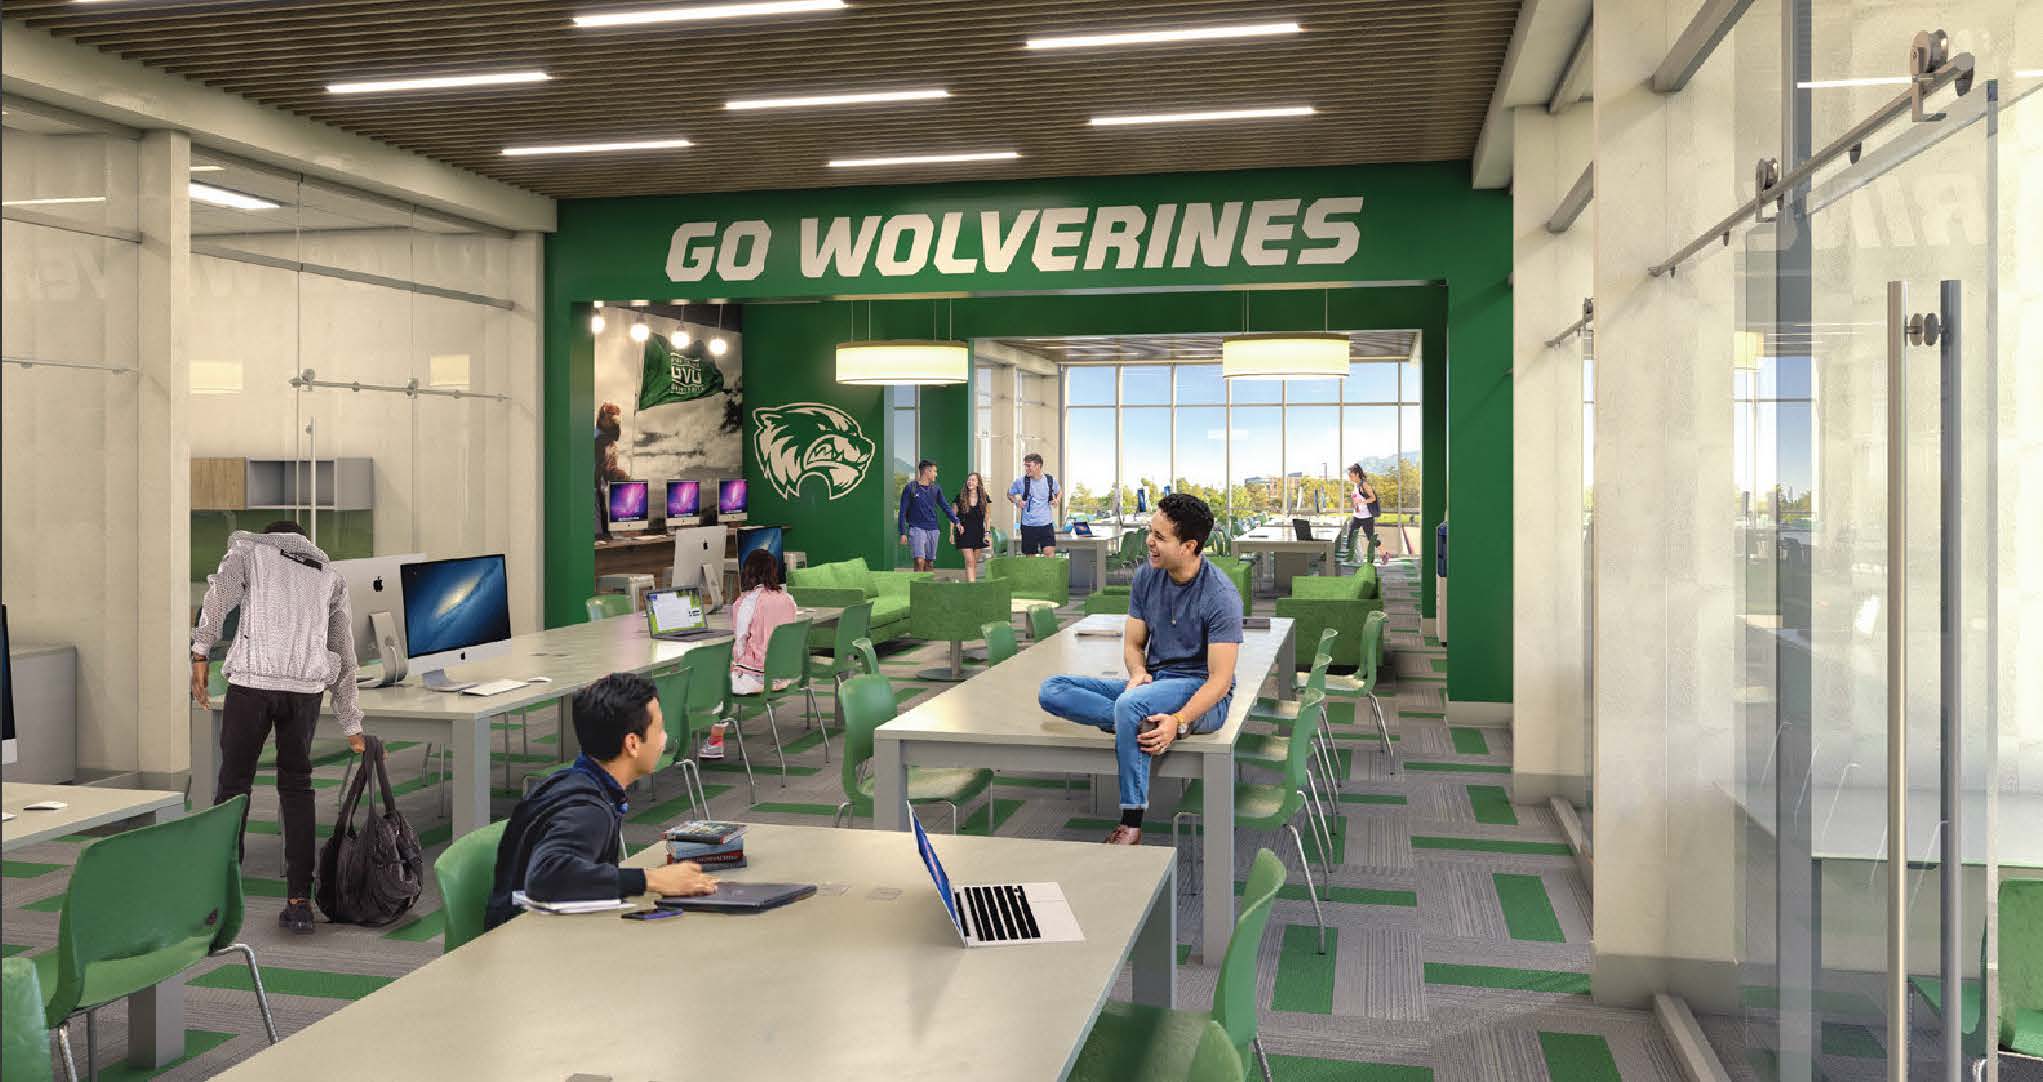 A rendering of the proposed academic facility for UVU Athletics.